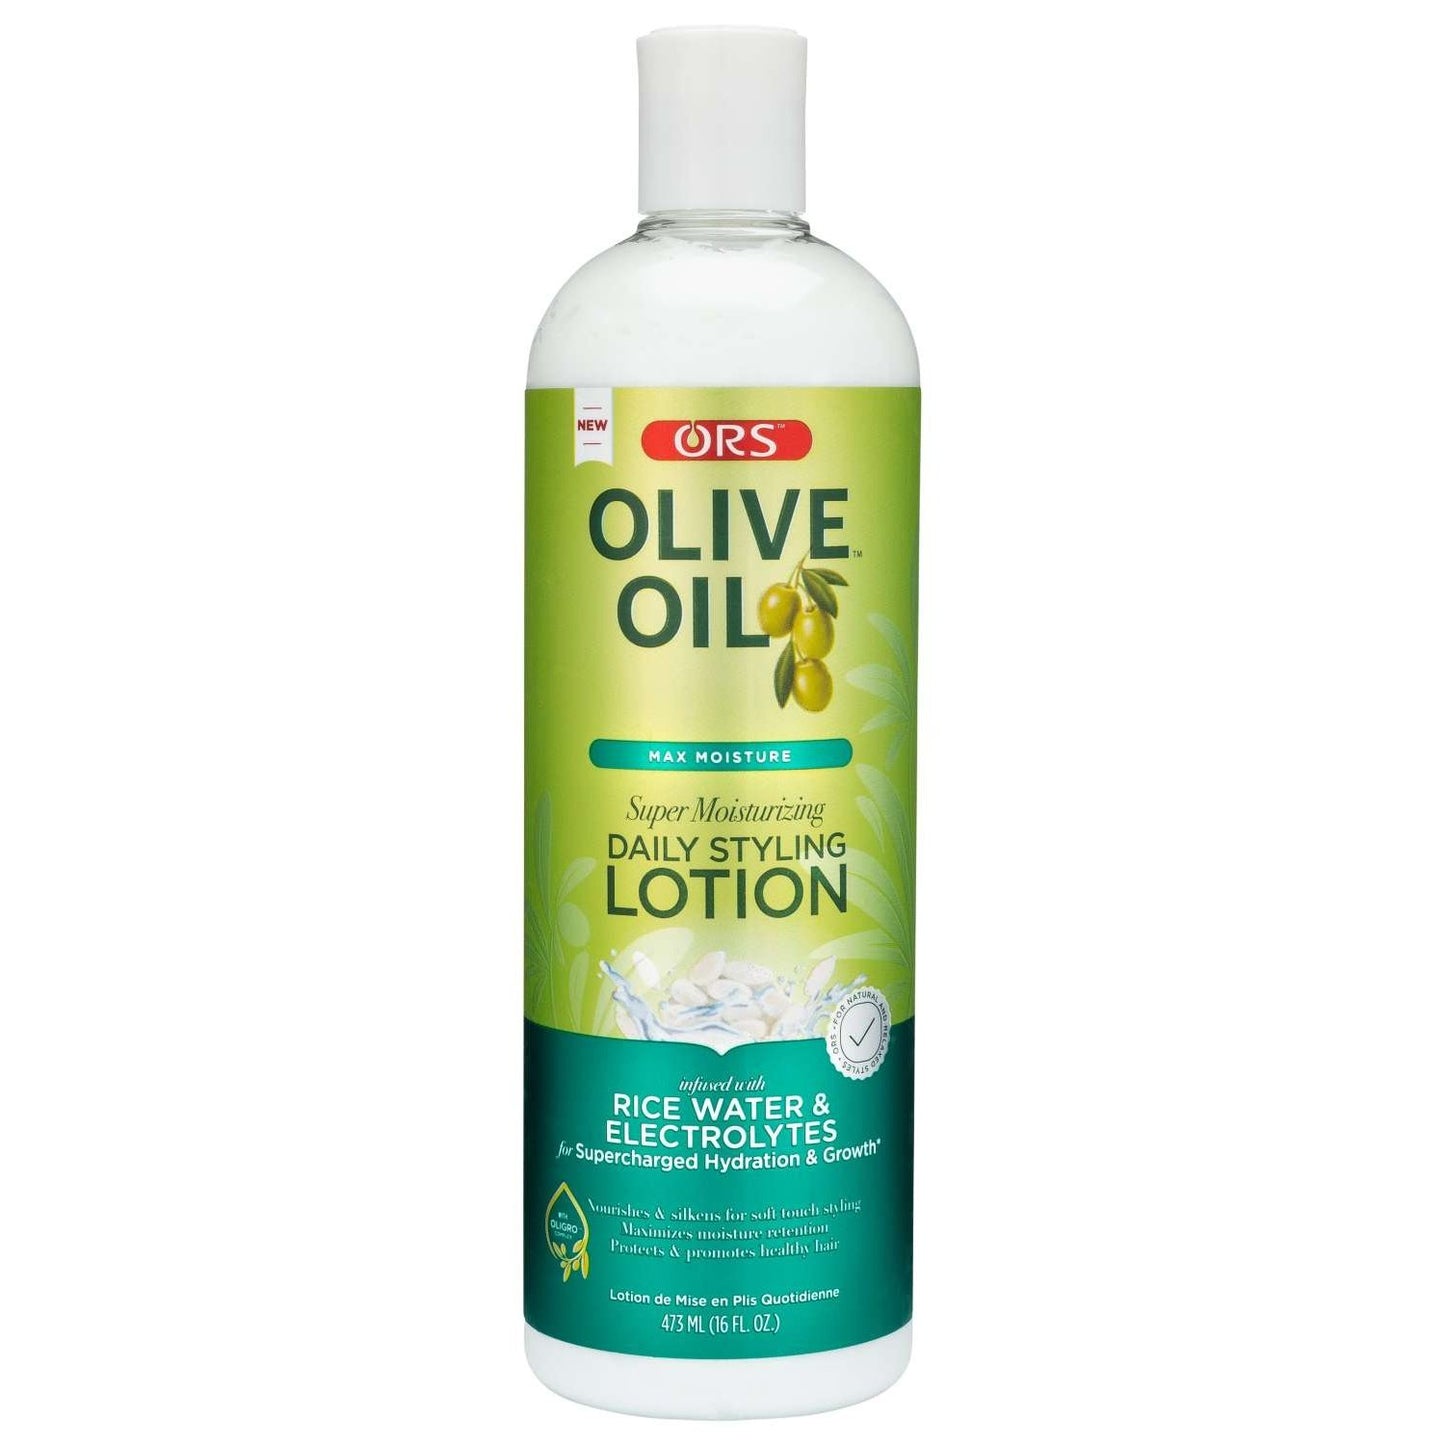 Ors Olive Oil Max Moisture Daily Styling Lotion